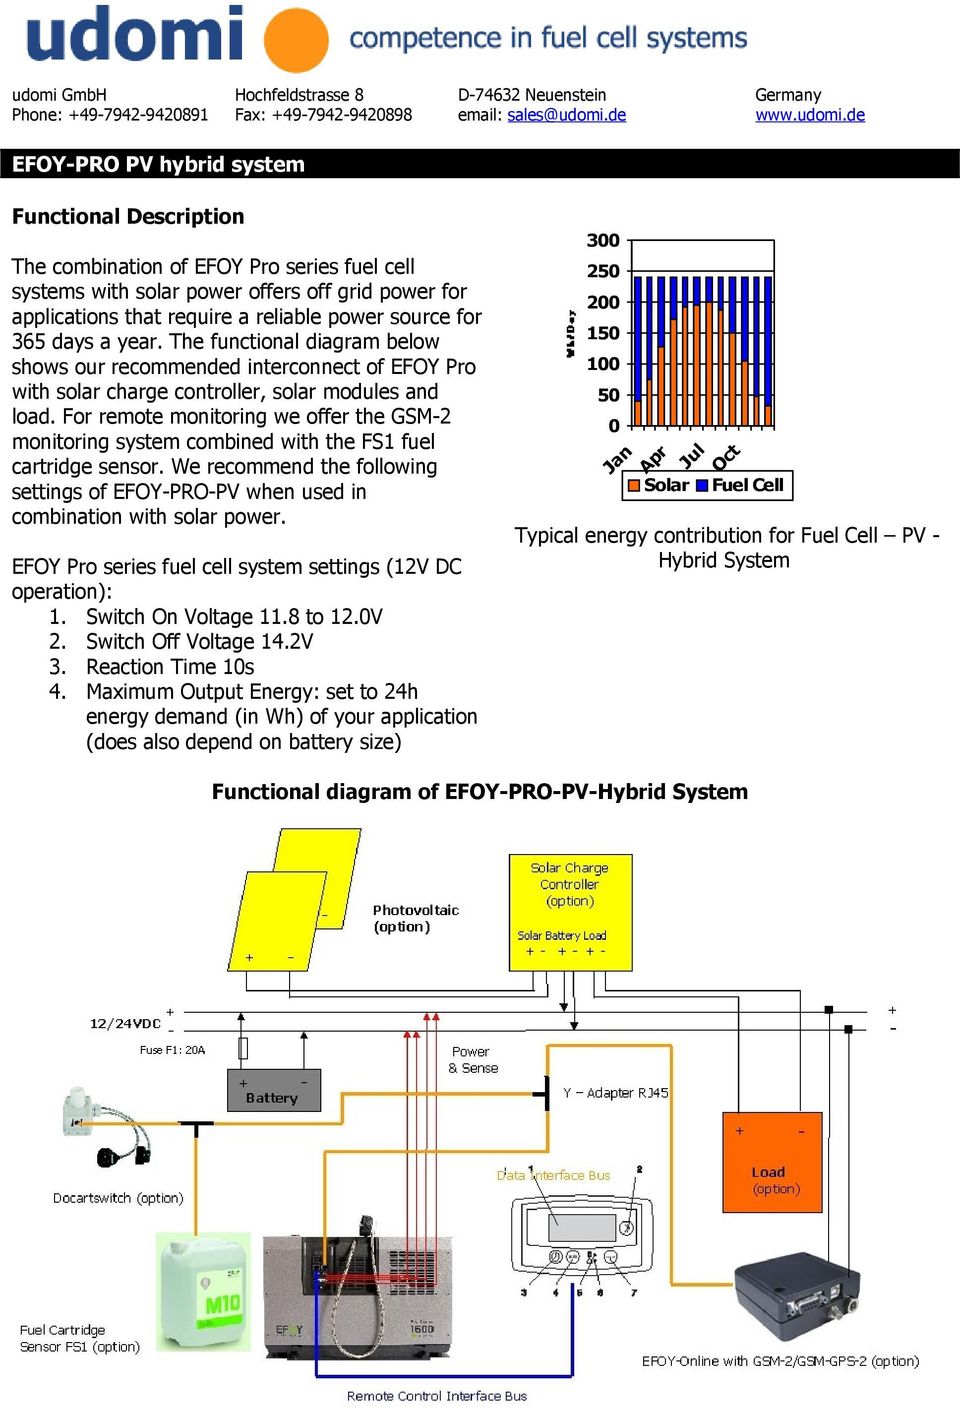 For remote monitoring we offer the GSM-2 monitoring system combined with the FS1 fuel cartridge sensor. We recommend the following settings of EFOY-PRO-PV when used in combination with solar power.